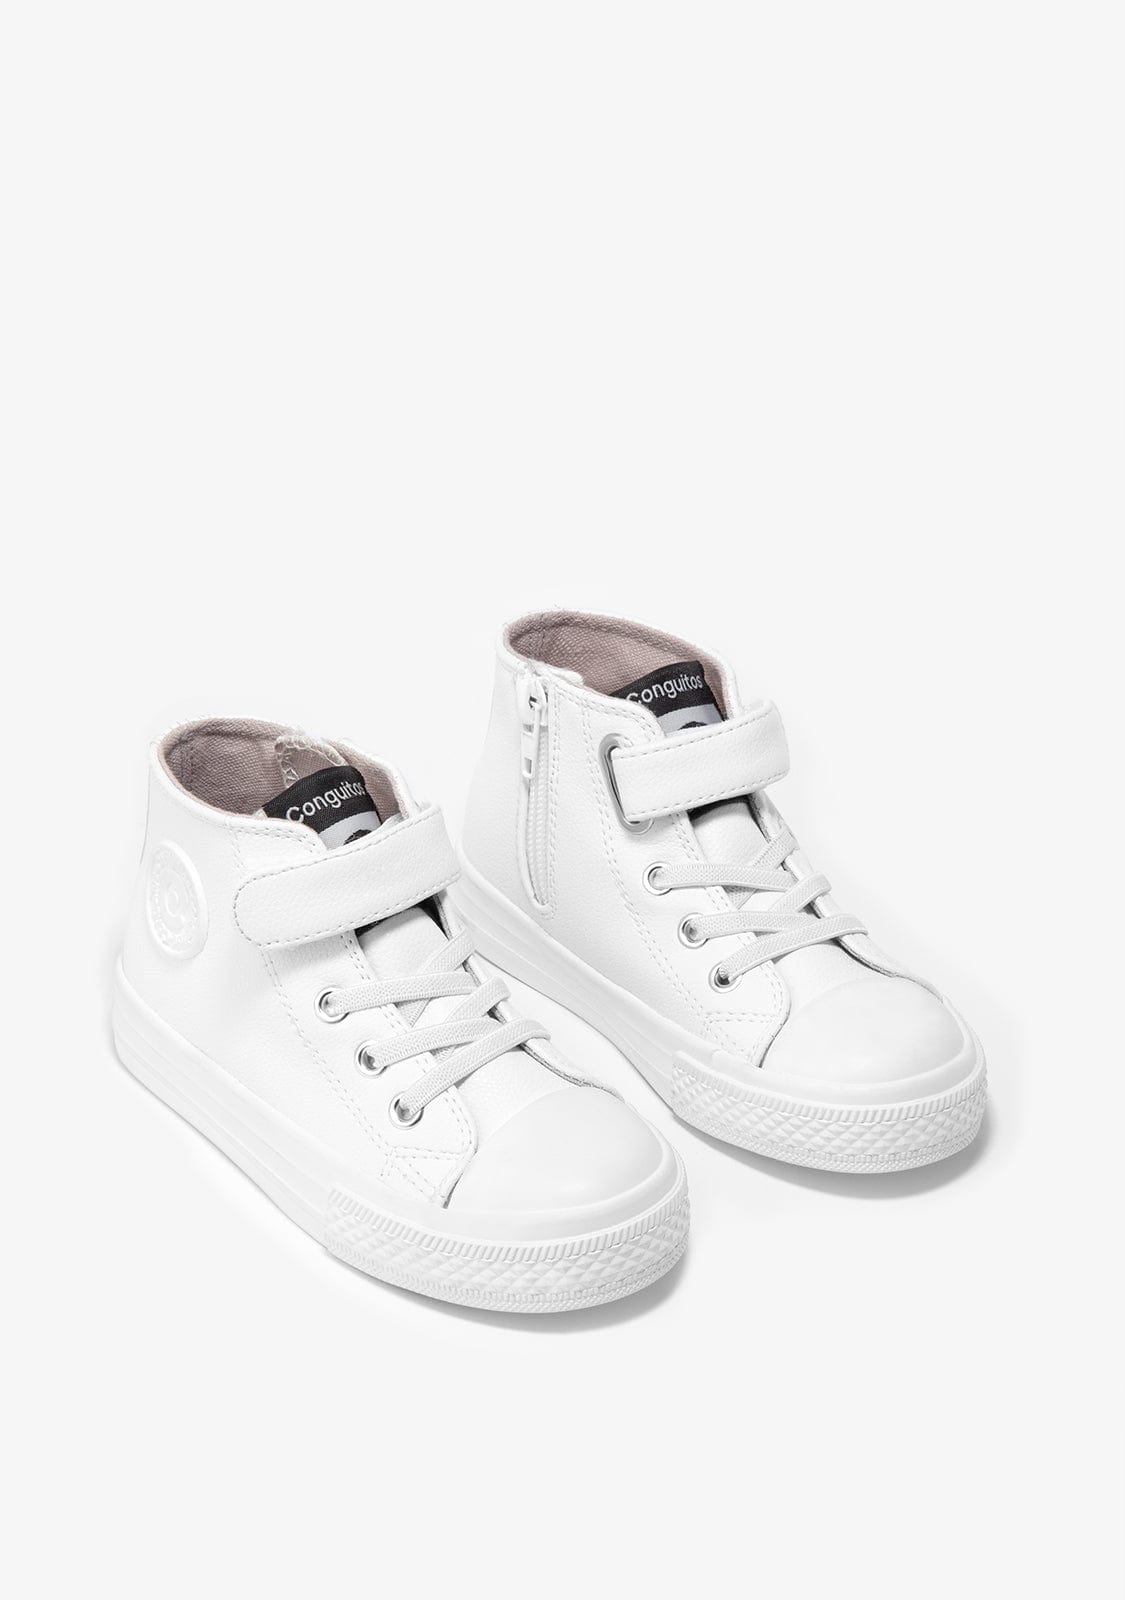 CONGUITOS Shoes Unisex Color Block White High-Top Sneakers